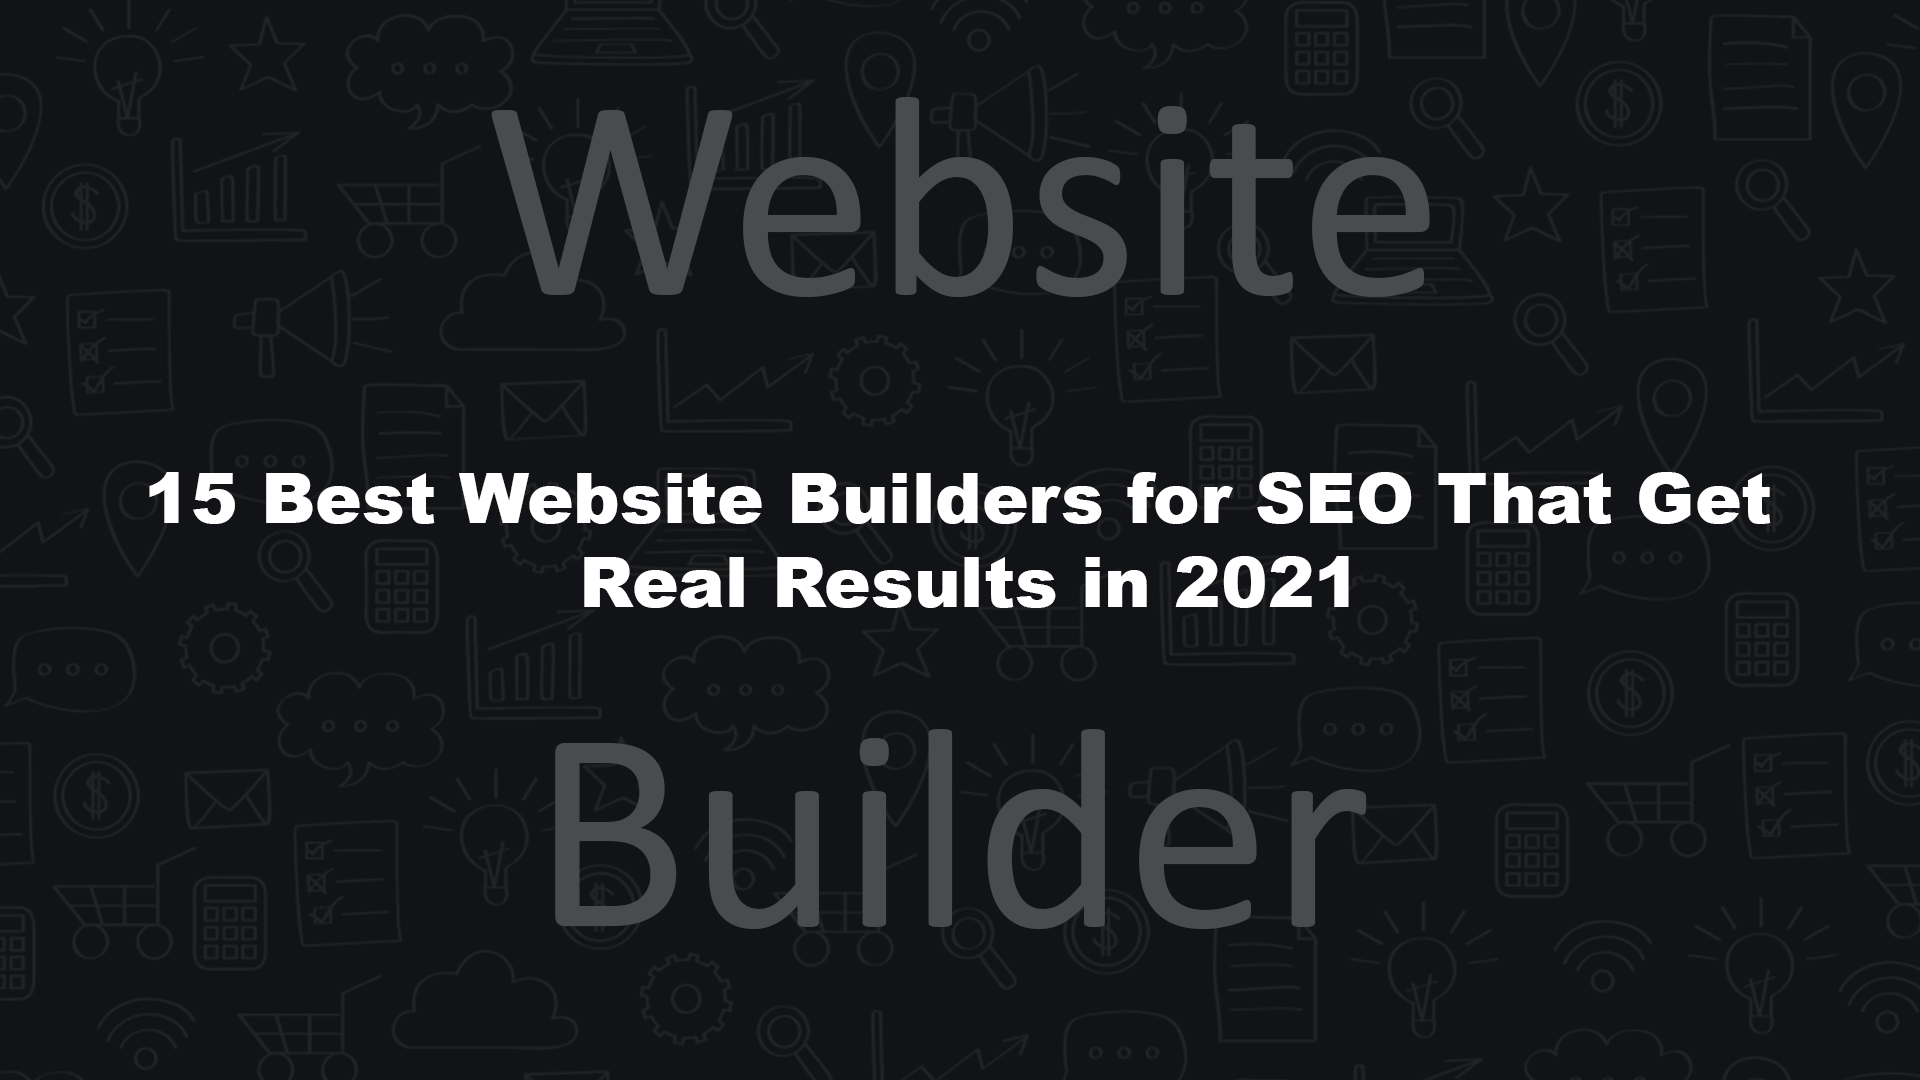 15 Best Website Builders for SEO That Get Real Results in 2021